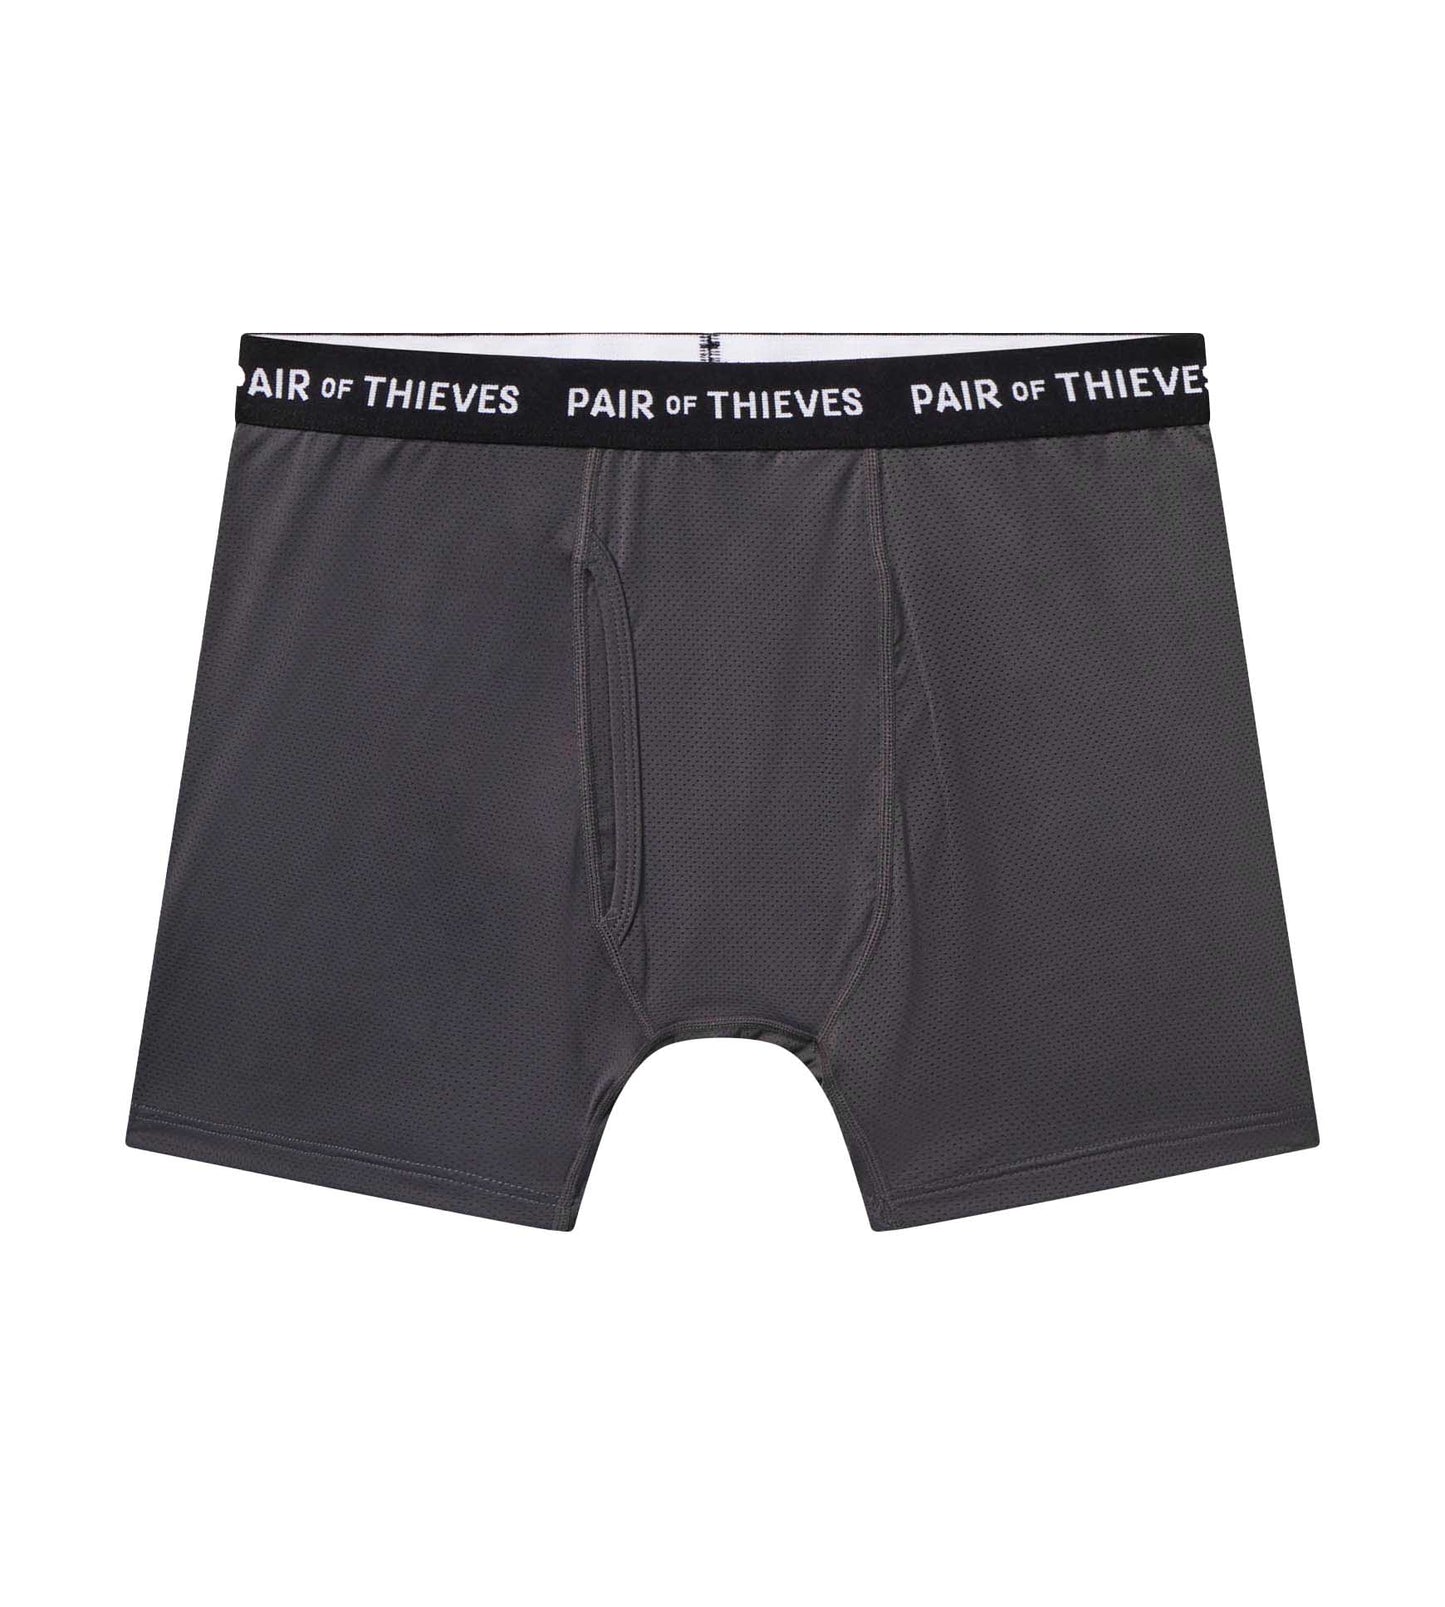 Chicago Cubs Pair of Thieves Super Fit 2-Pack Boxer Briefs Set